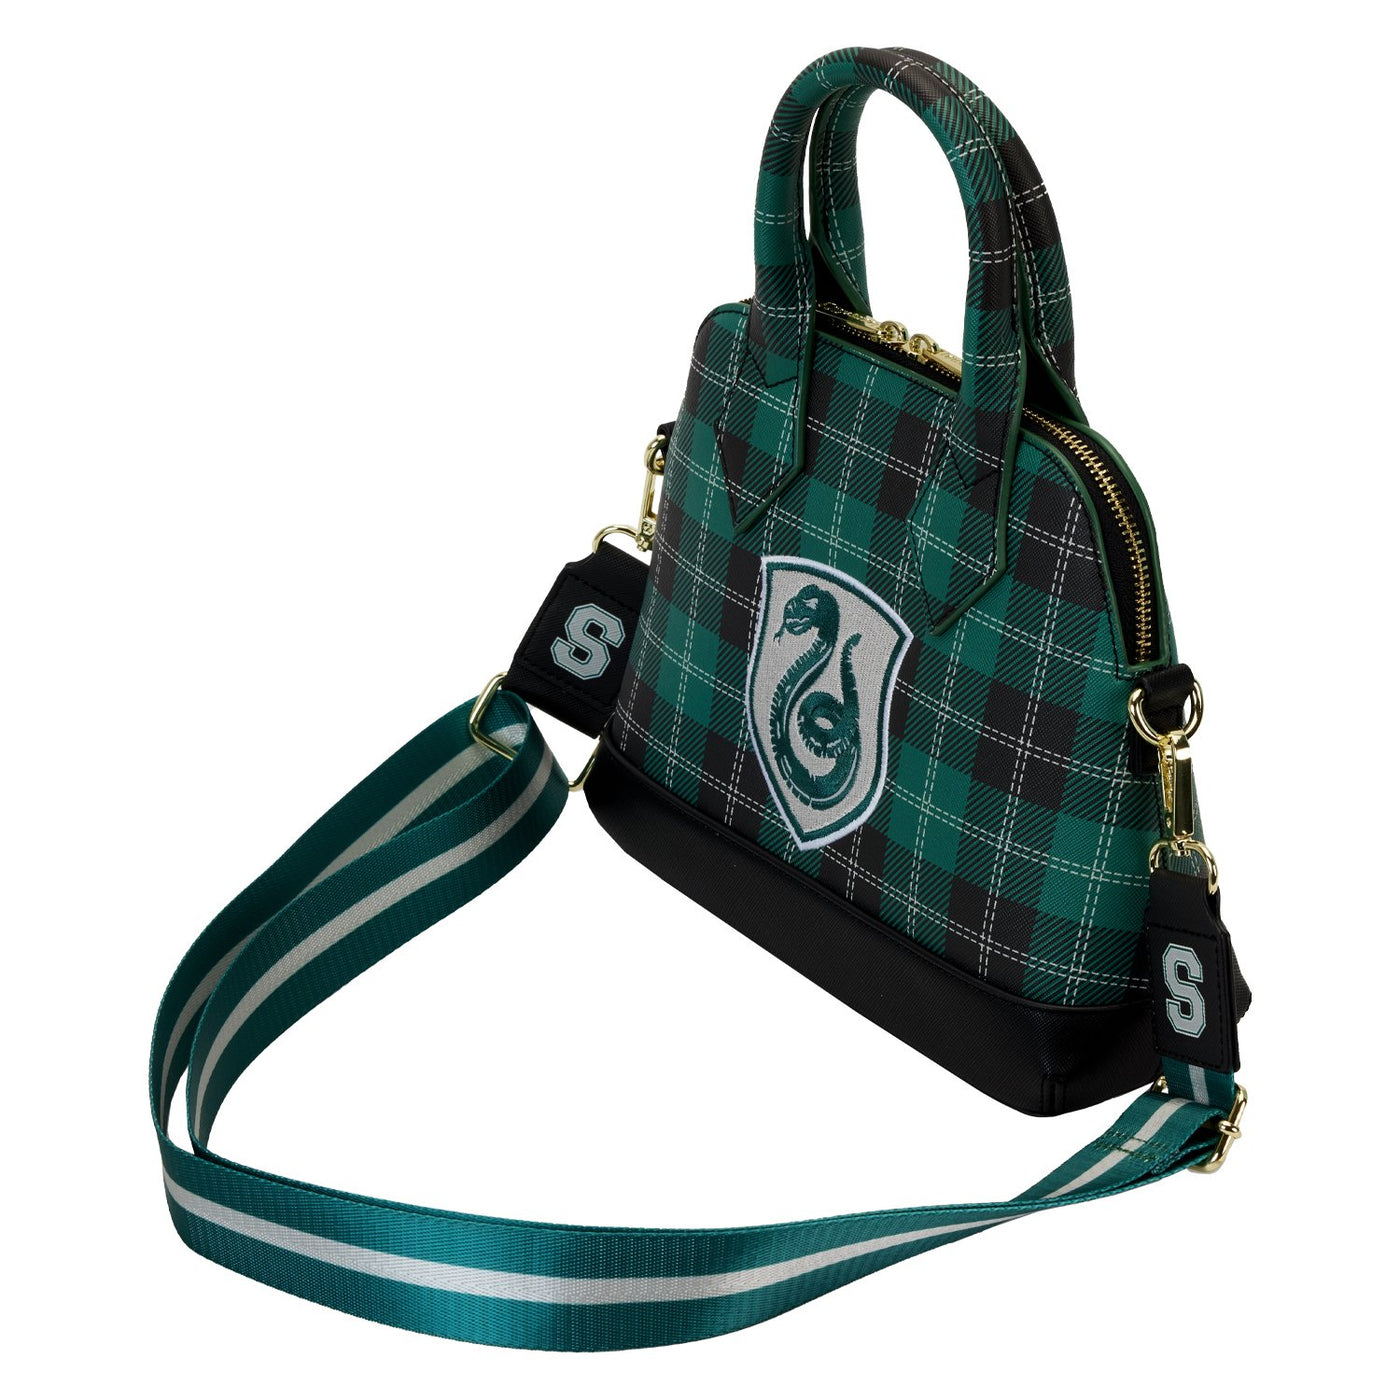 Loungefly Warner Brothers Harry Potter Varsity Slytherin Plaid Crossbody - Top View